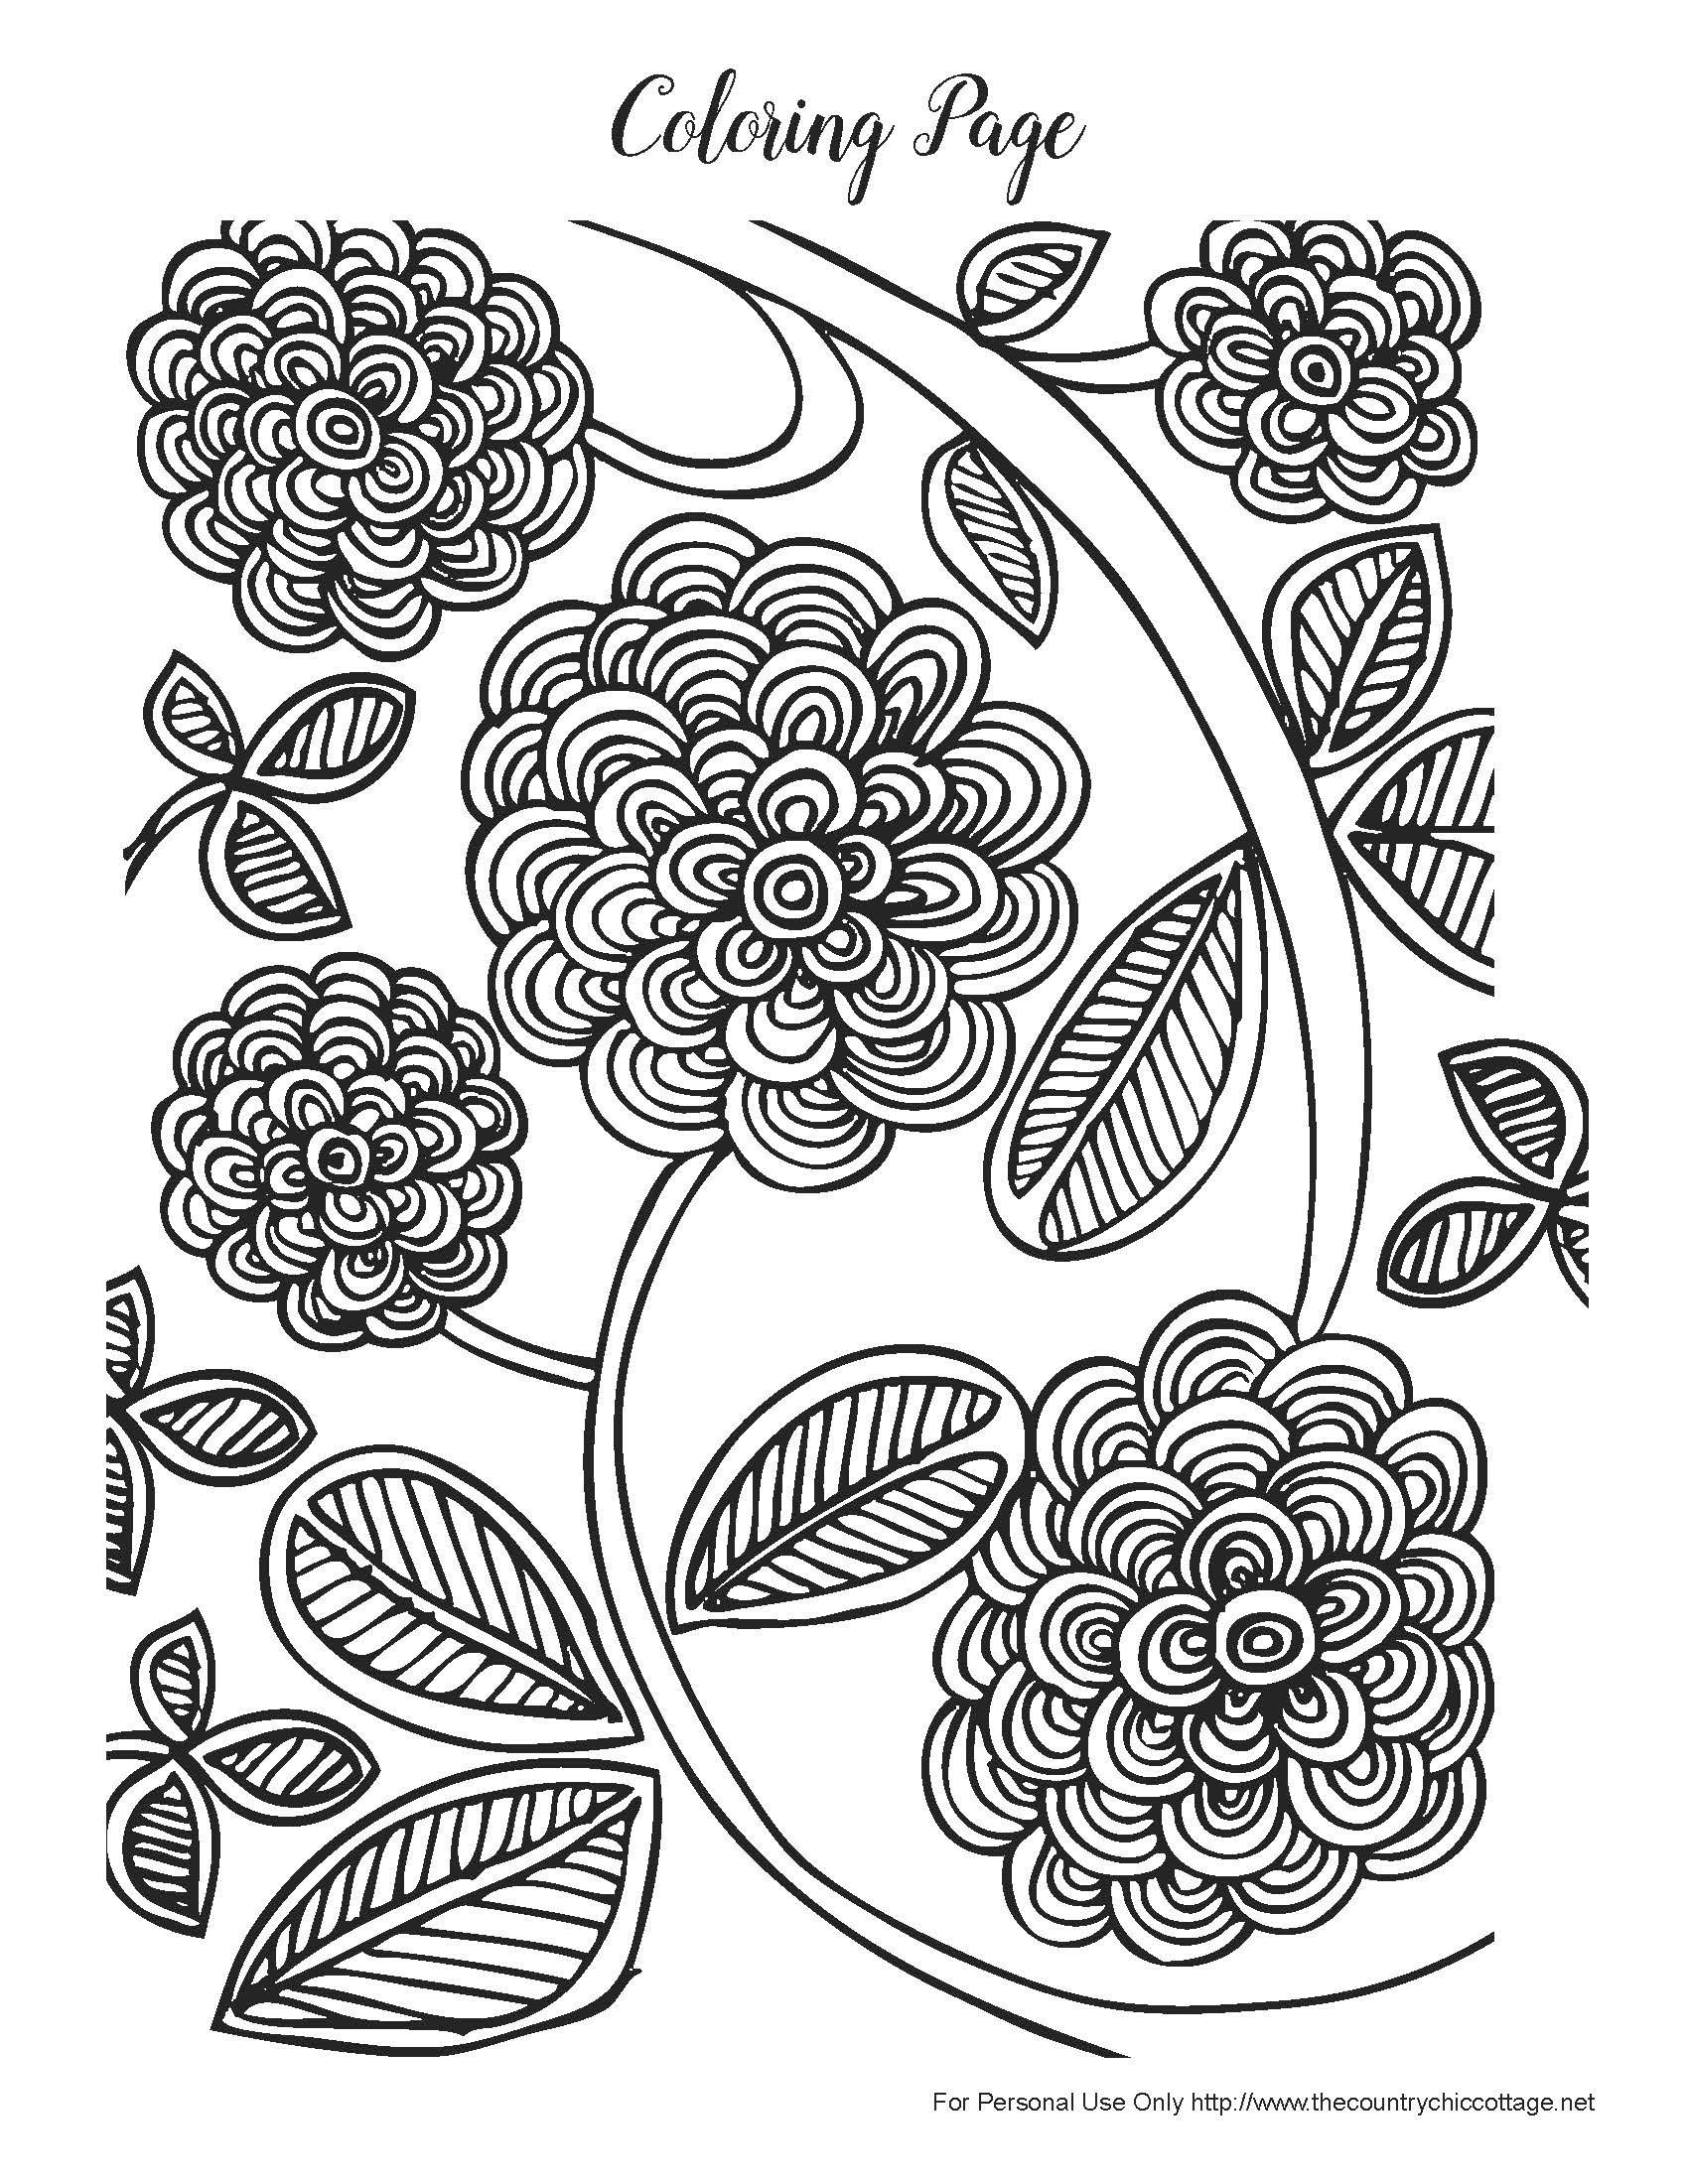 Free Spring Coloring Pages For Adults | Products I Love | Spring - Free Printable Spring Coloring Pages For Adults